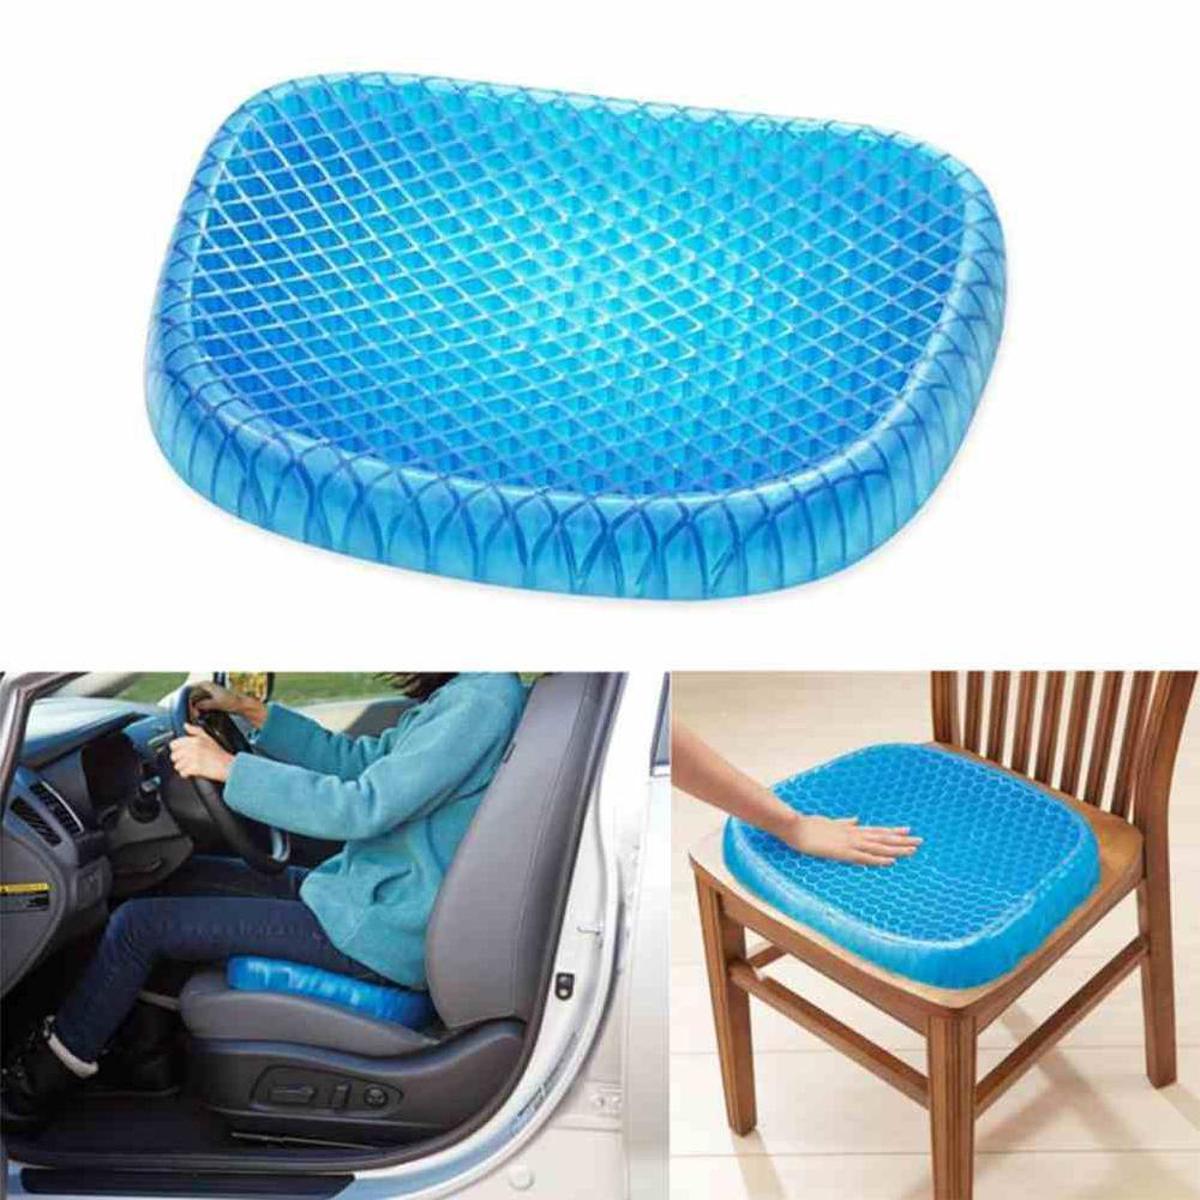 Egg Sitter - The Original Gel Seat Support Cushion Pad